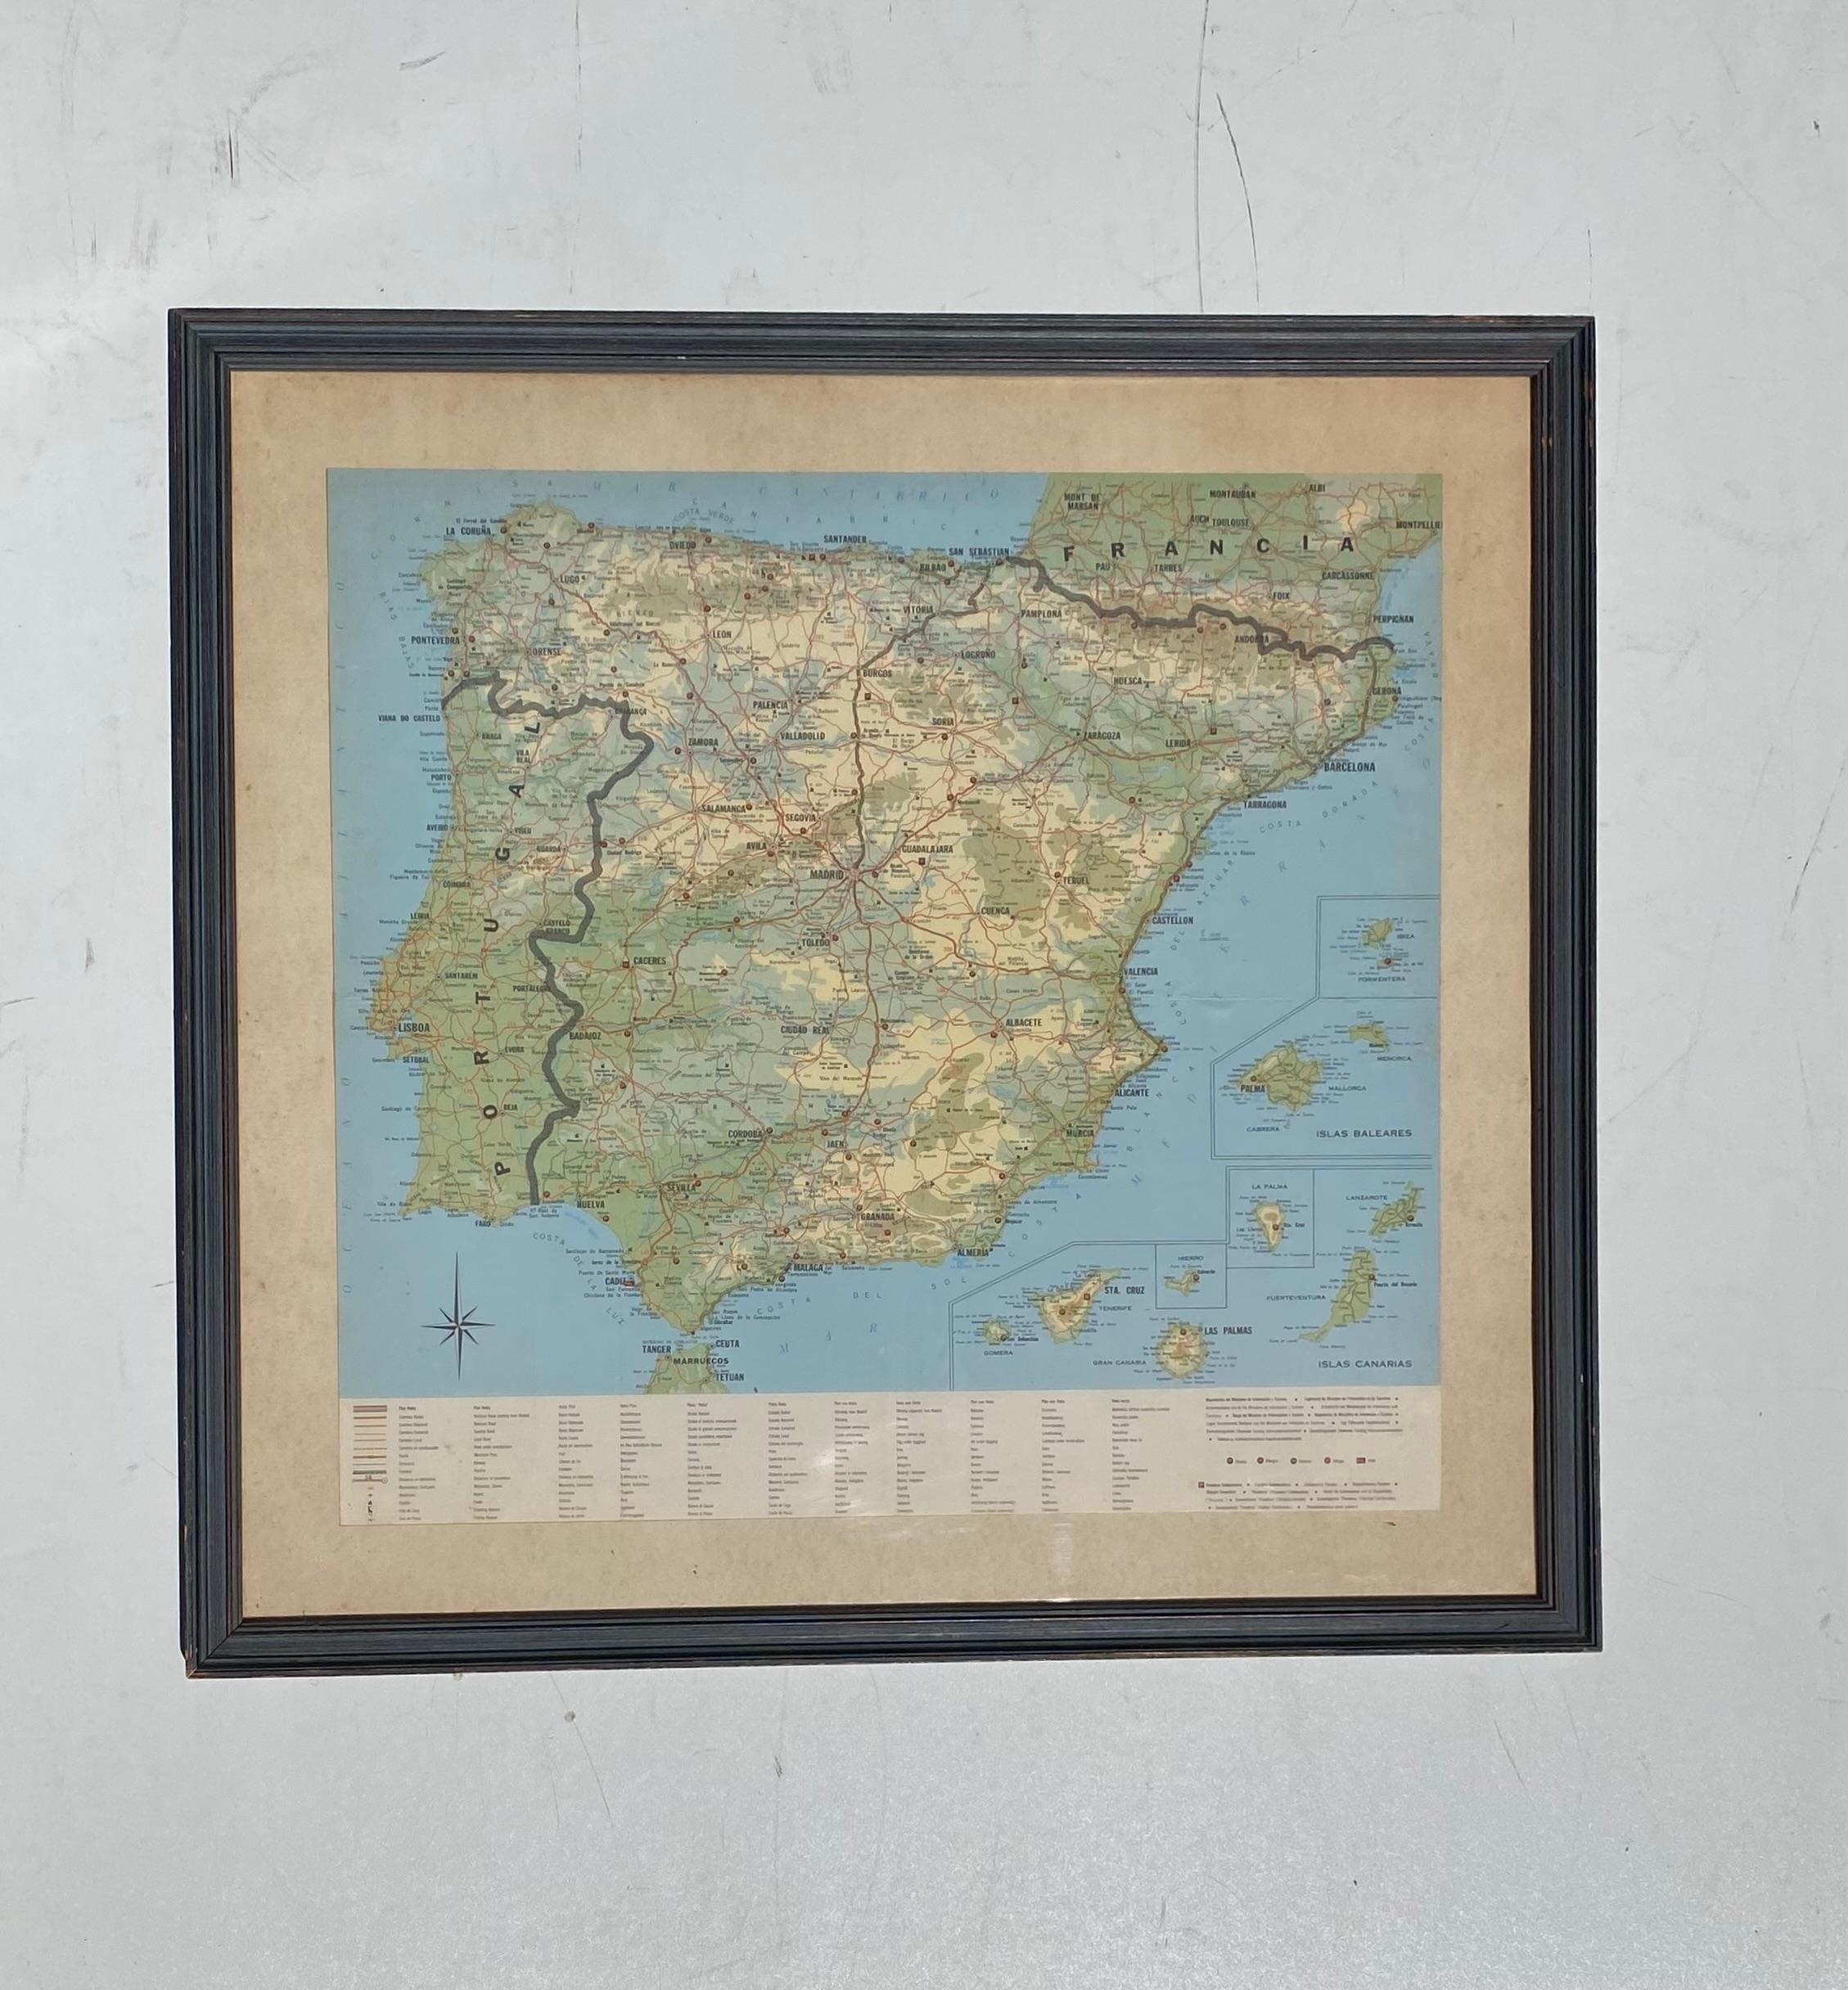 Vintage Framed Print of Spain, Canary Islands and Portugal, Framed


Offered for sale is a vintage framed print of a map of Spain, the Canary Islands, and Portugal. The maps show some vintage patina commensurate with age. The frame is wired and